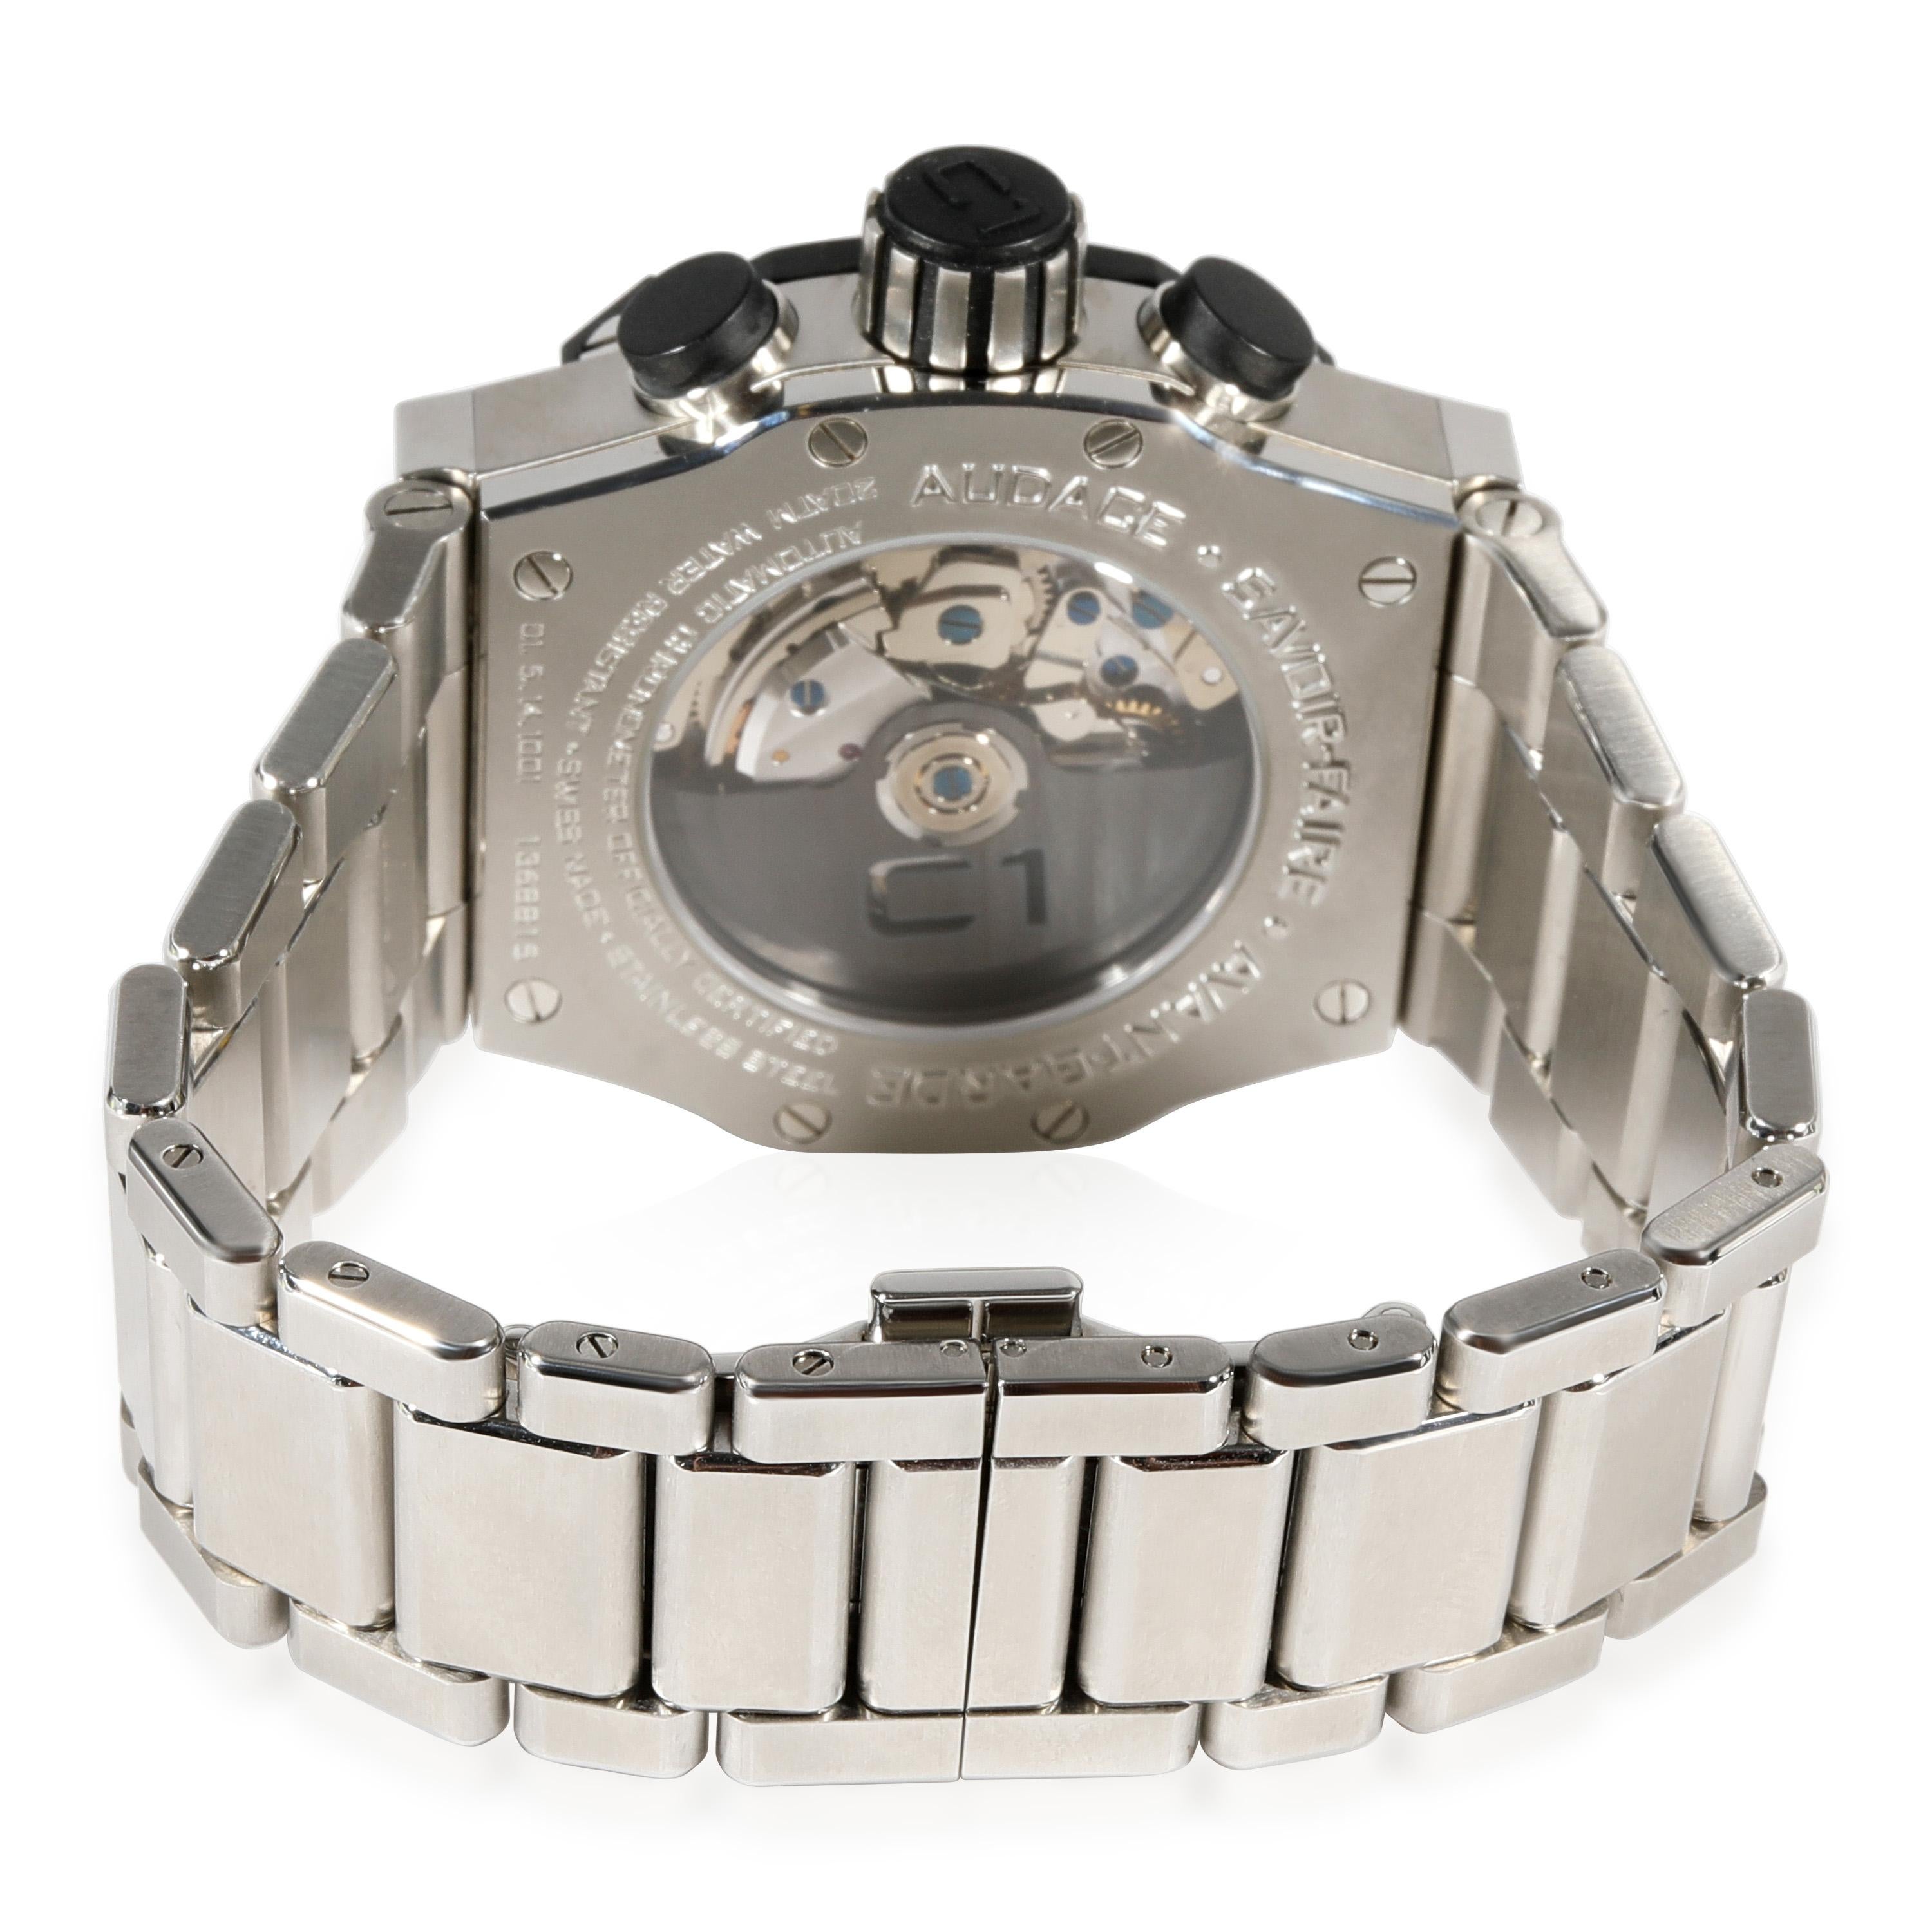 Concord C1 Chronograph 0320003 Men's Watch in  Stainless Steel

SKU: 115662

PRIMARY DETAILS
Brand: Concord
Model: C1 Chronograph
Country of Origin: Switzerland
Movement Type: Mechanical: Automatic/Kinetic
Year of Manufacture: 2010-2019
Condition: